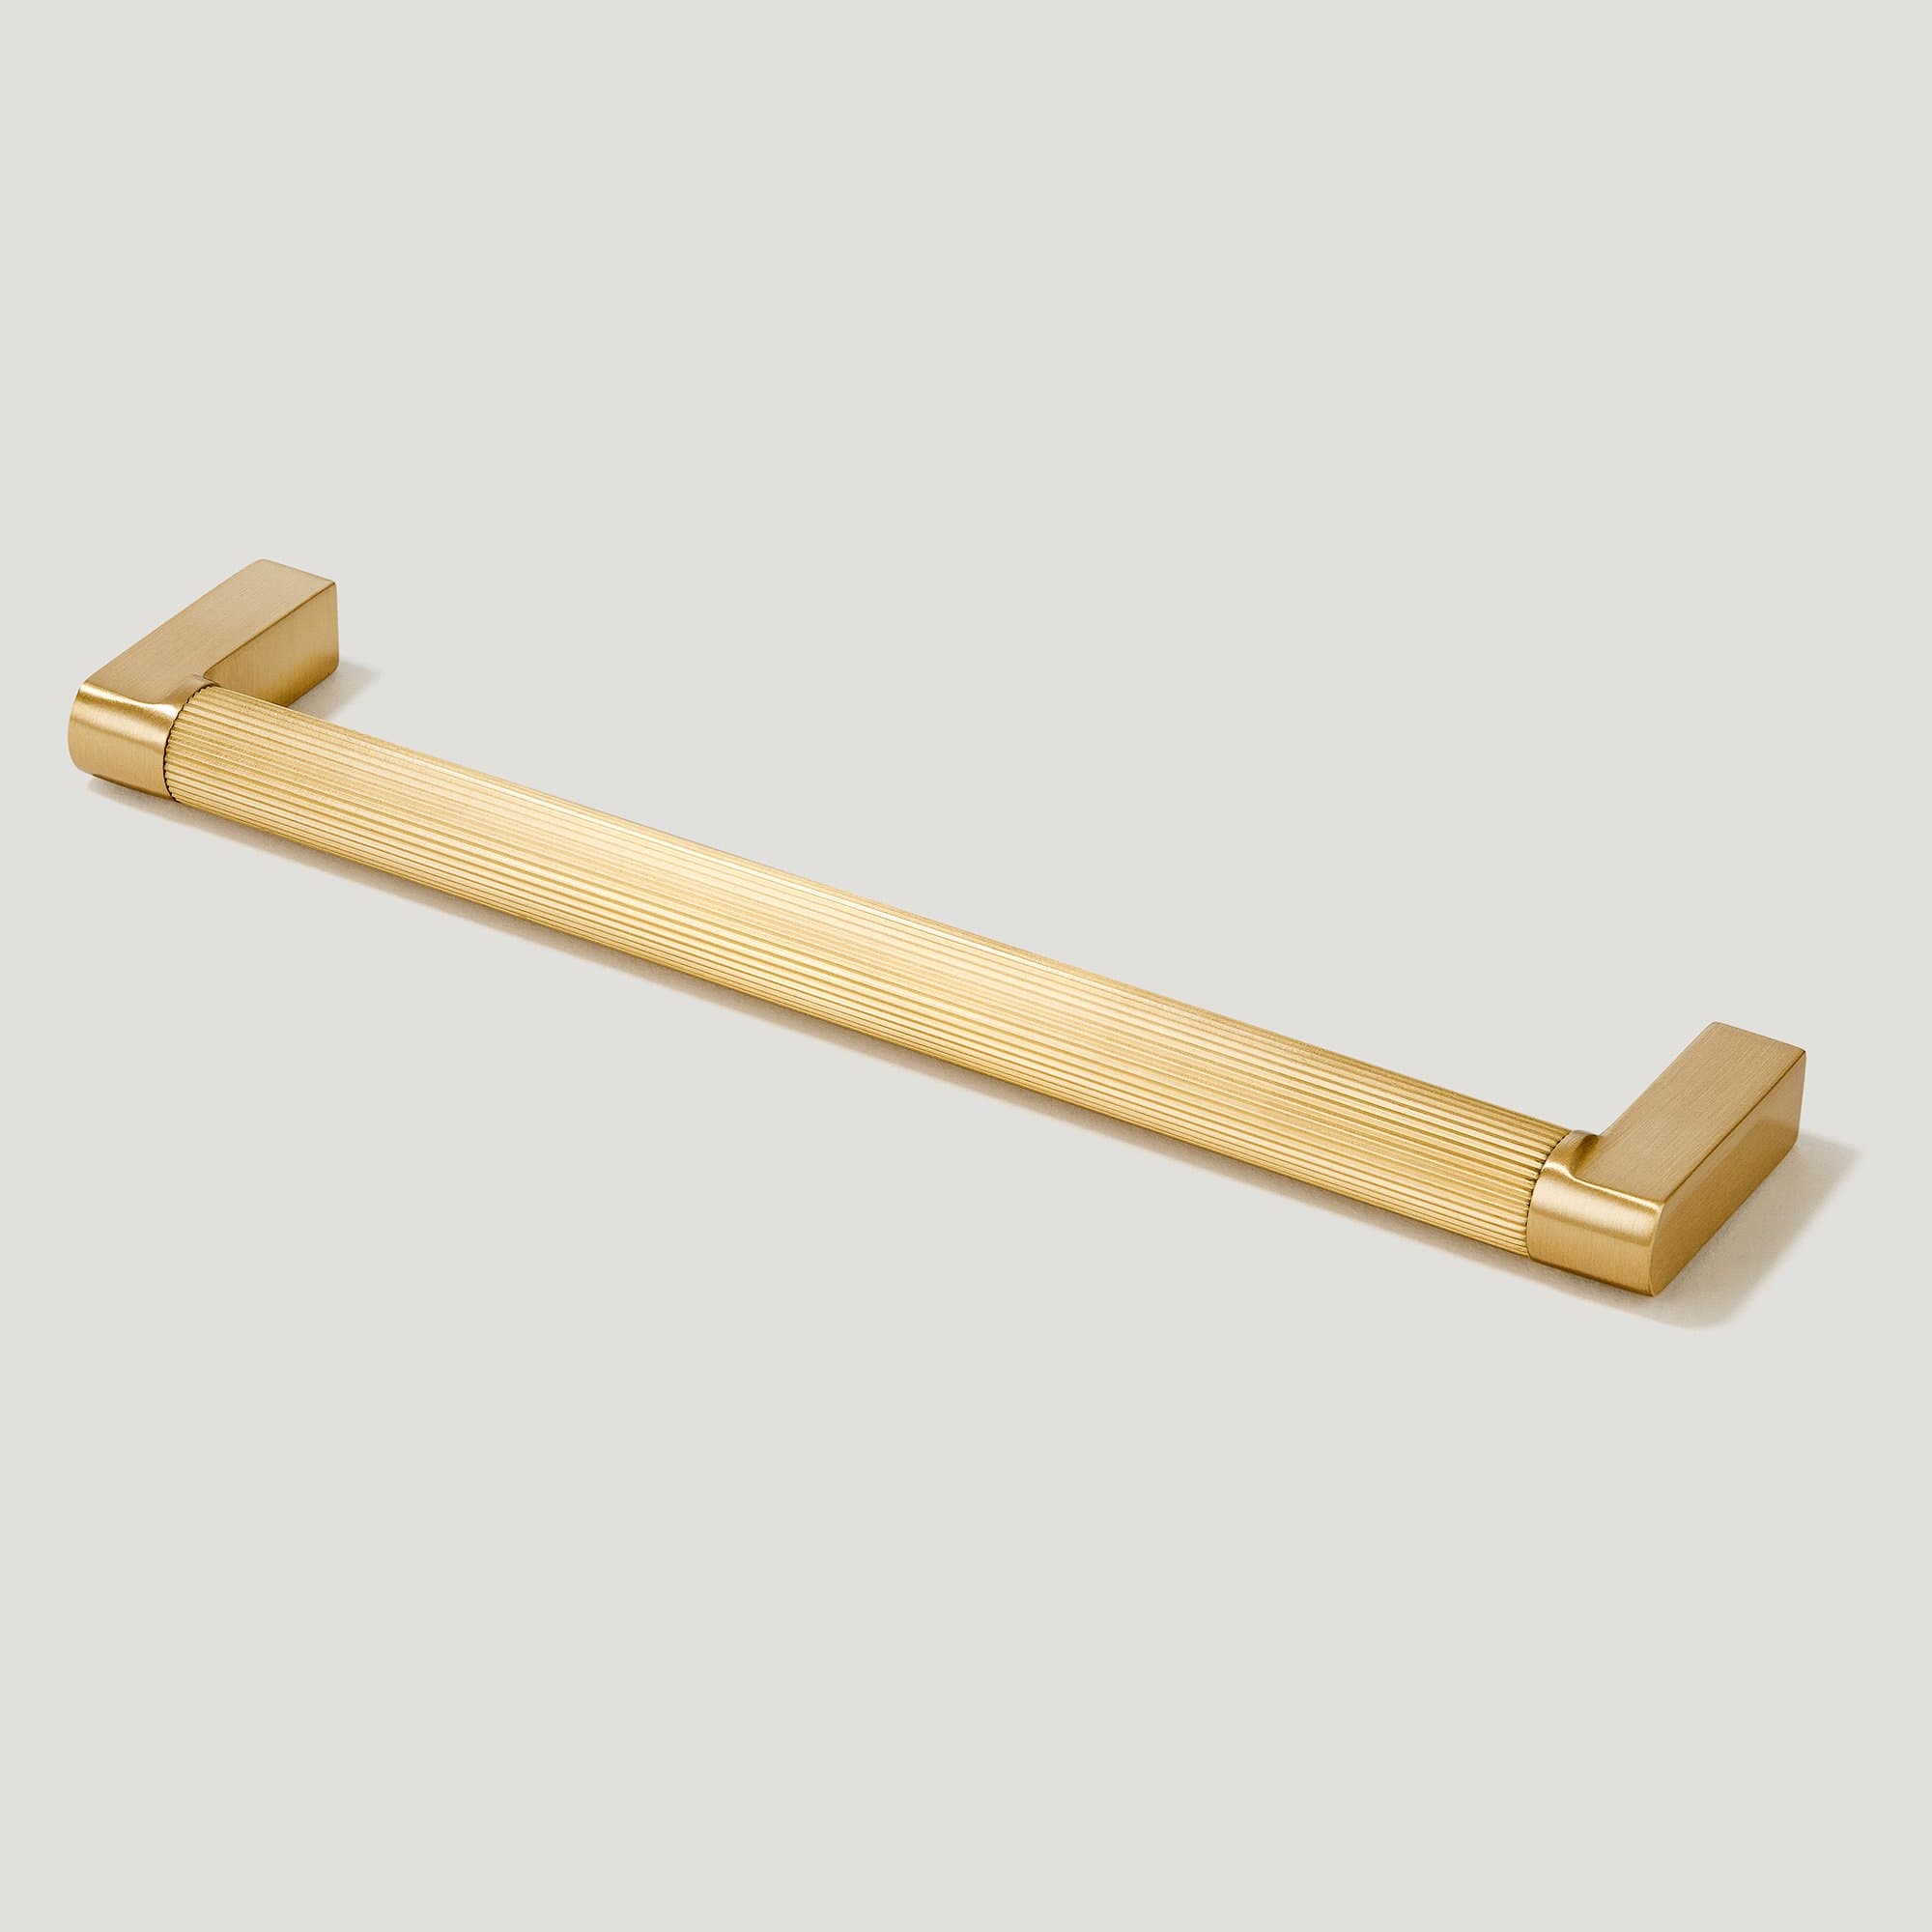 Plank Hardware Handles & Knobs 170mm (160mm screw w) BECKER Grooved D-Bar Handle - Solid Brass